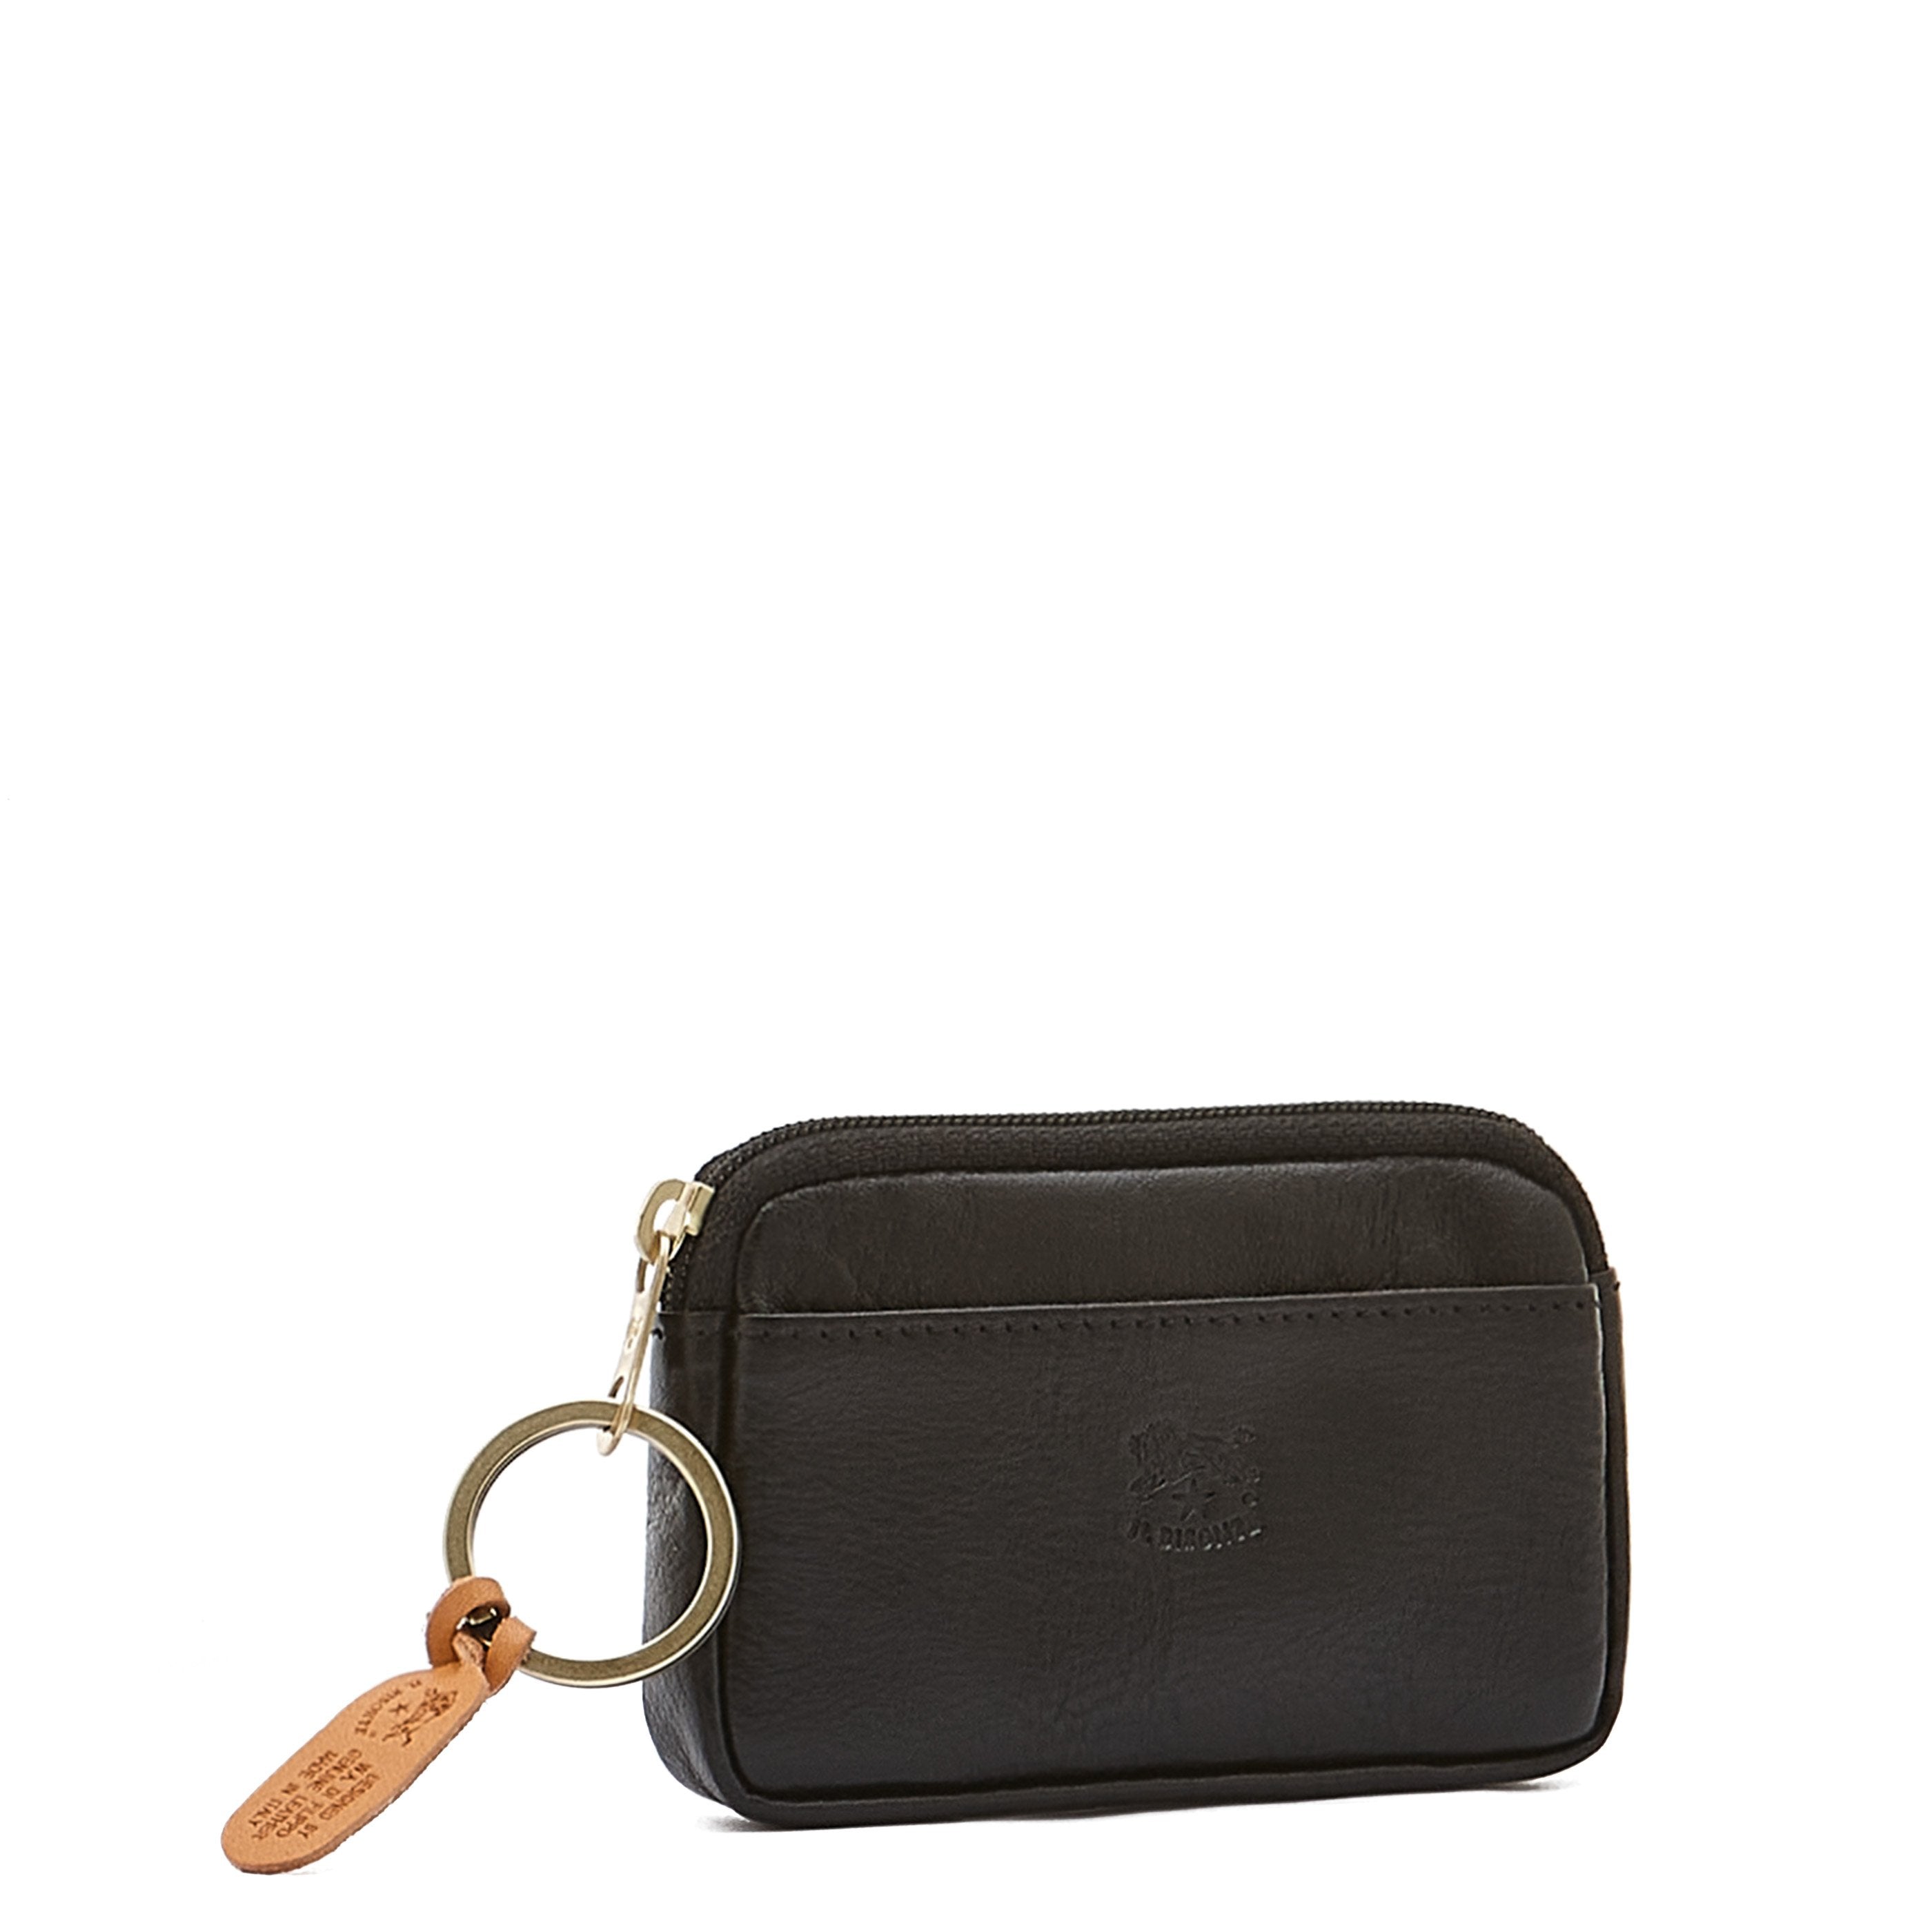 Coin purse in calf leather color black